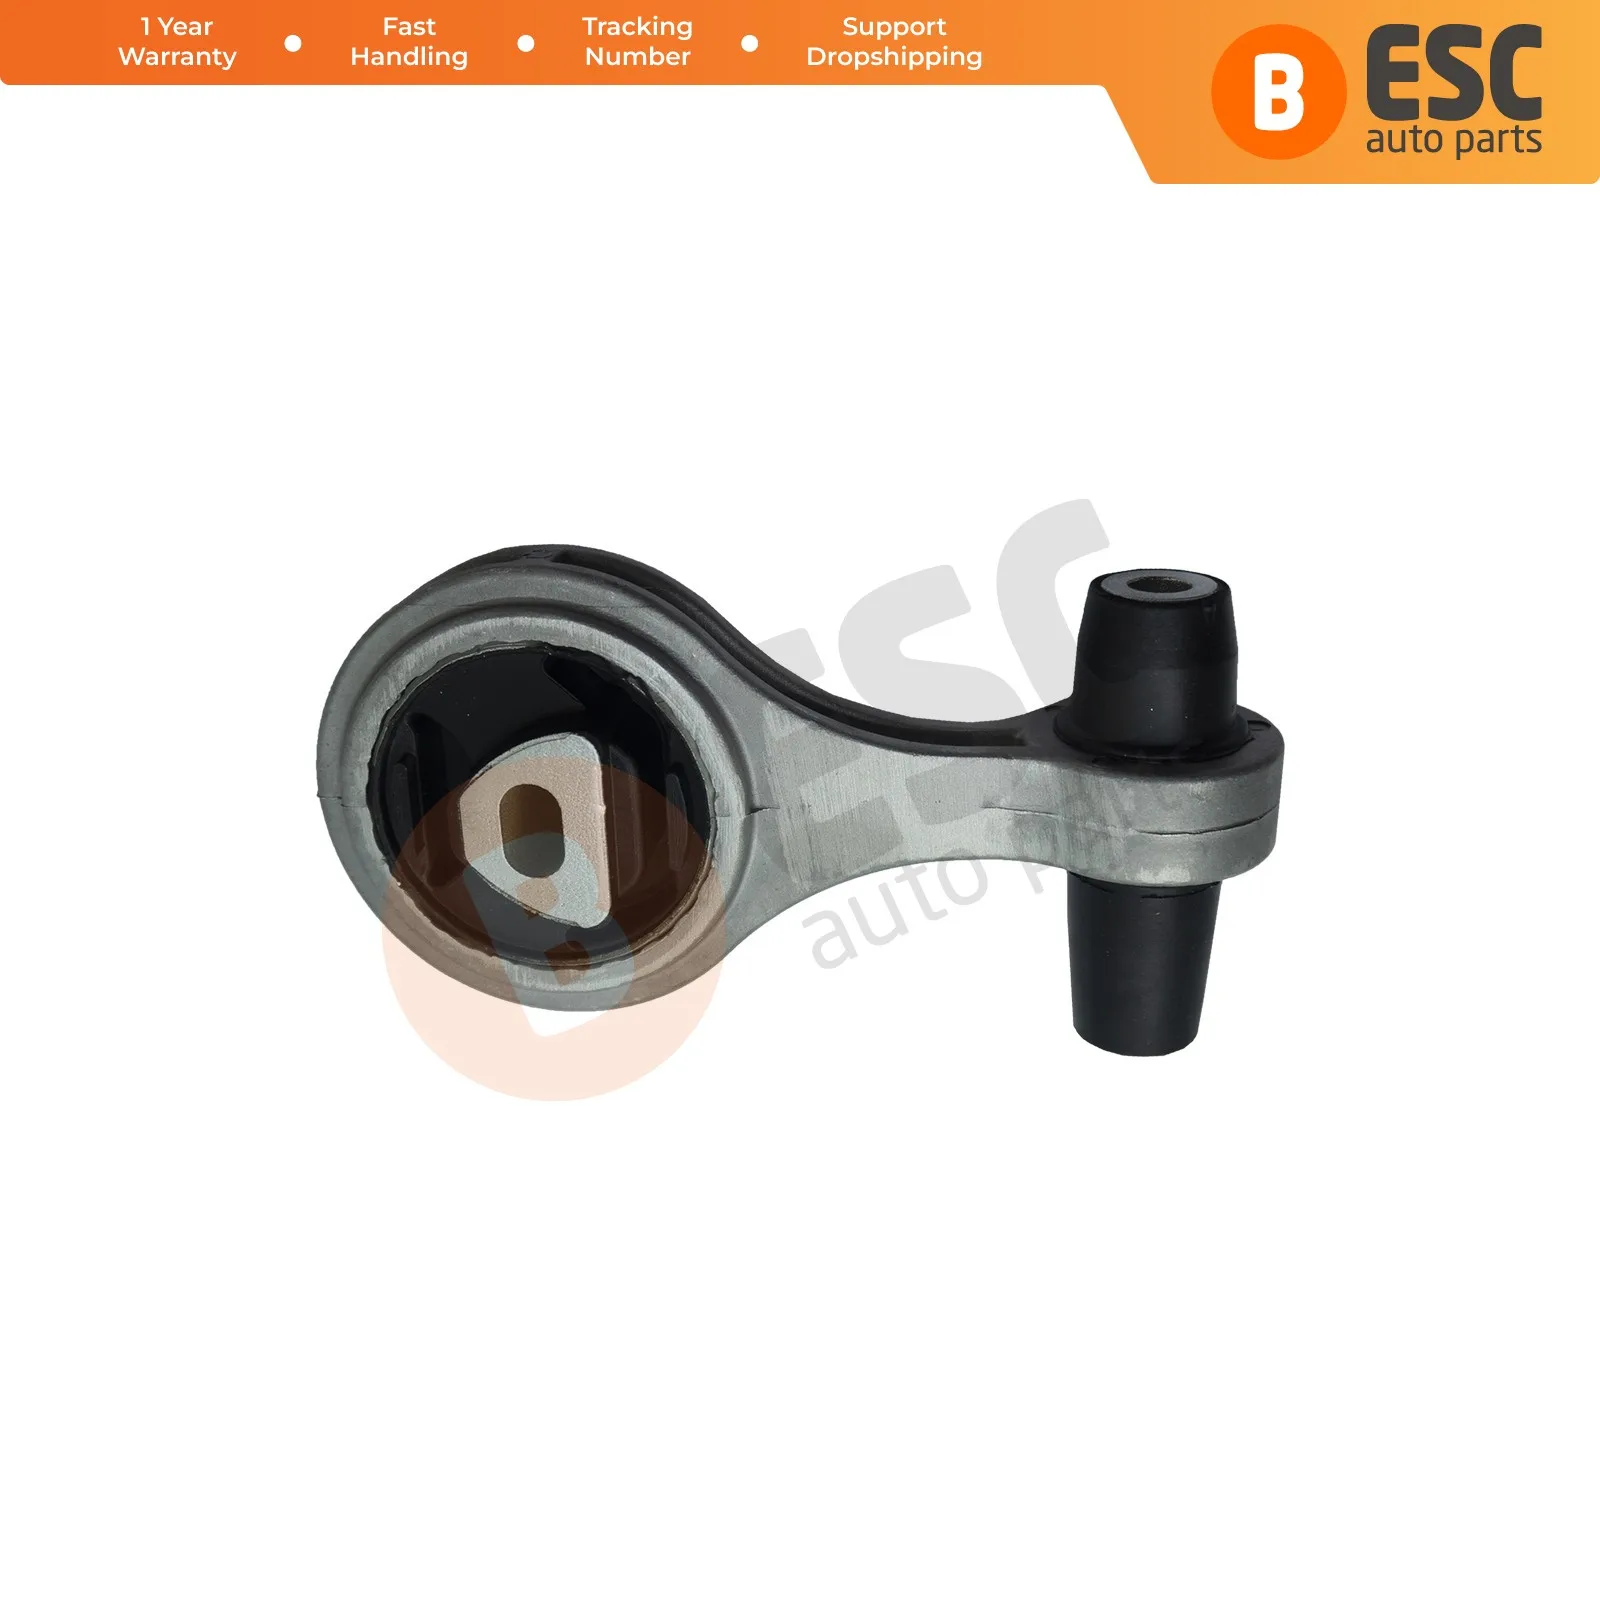 

ESC Auto Parts ESP910 Engine Mount Motor Rear Bearing Engine Mounting for Fiat 46767476,46759739 Fast Shipment Ship From Turkey